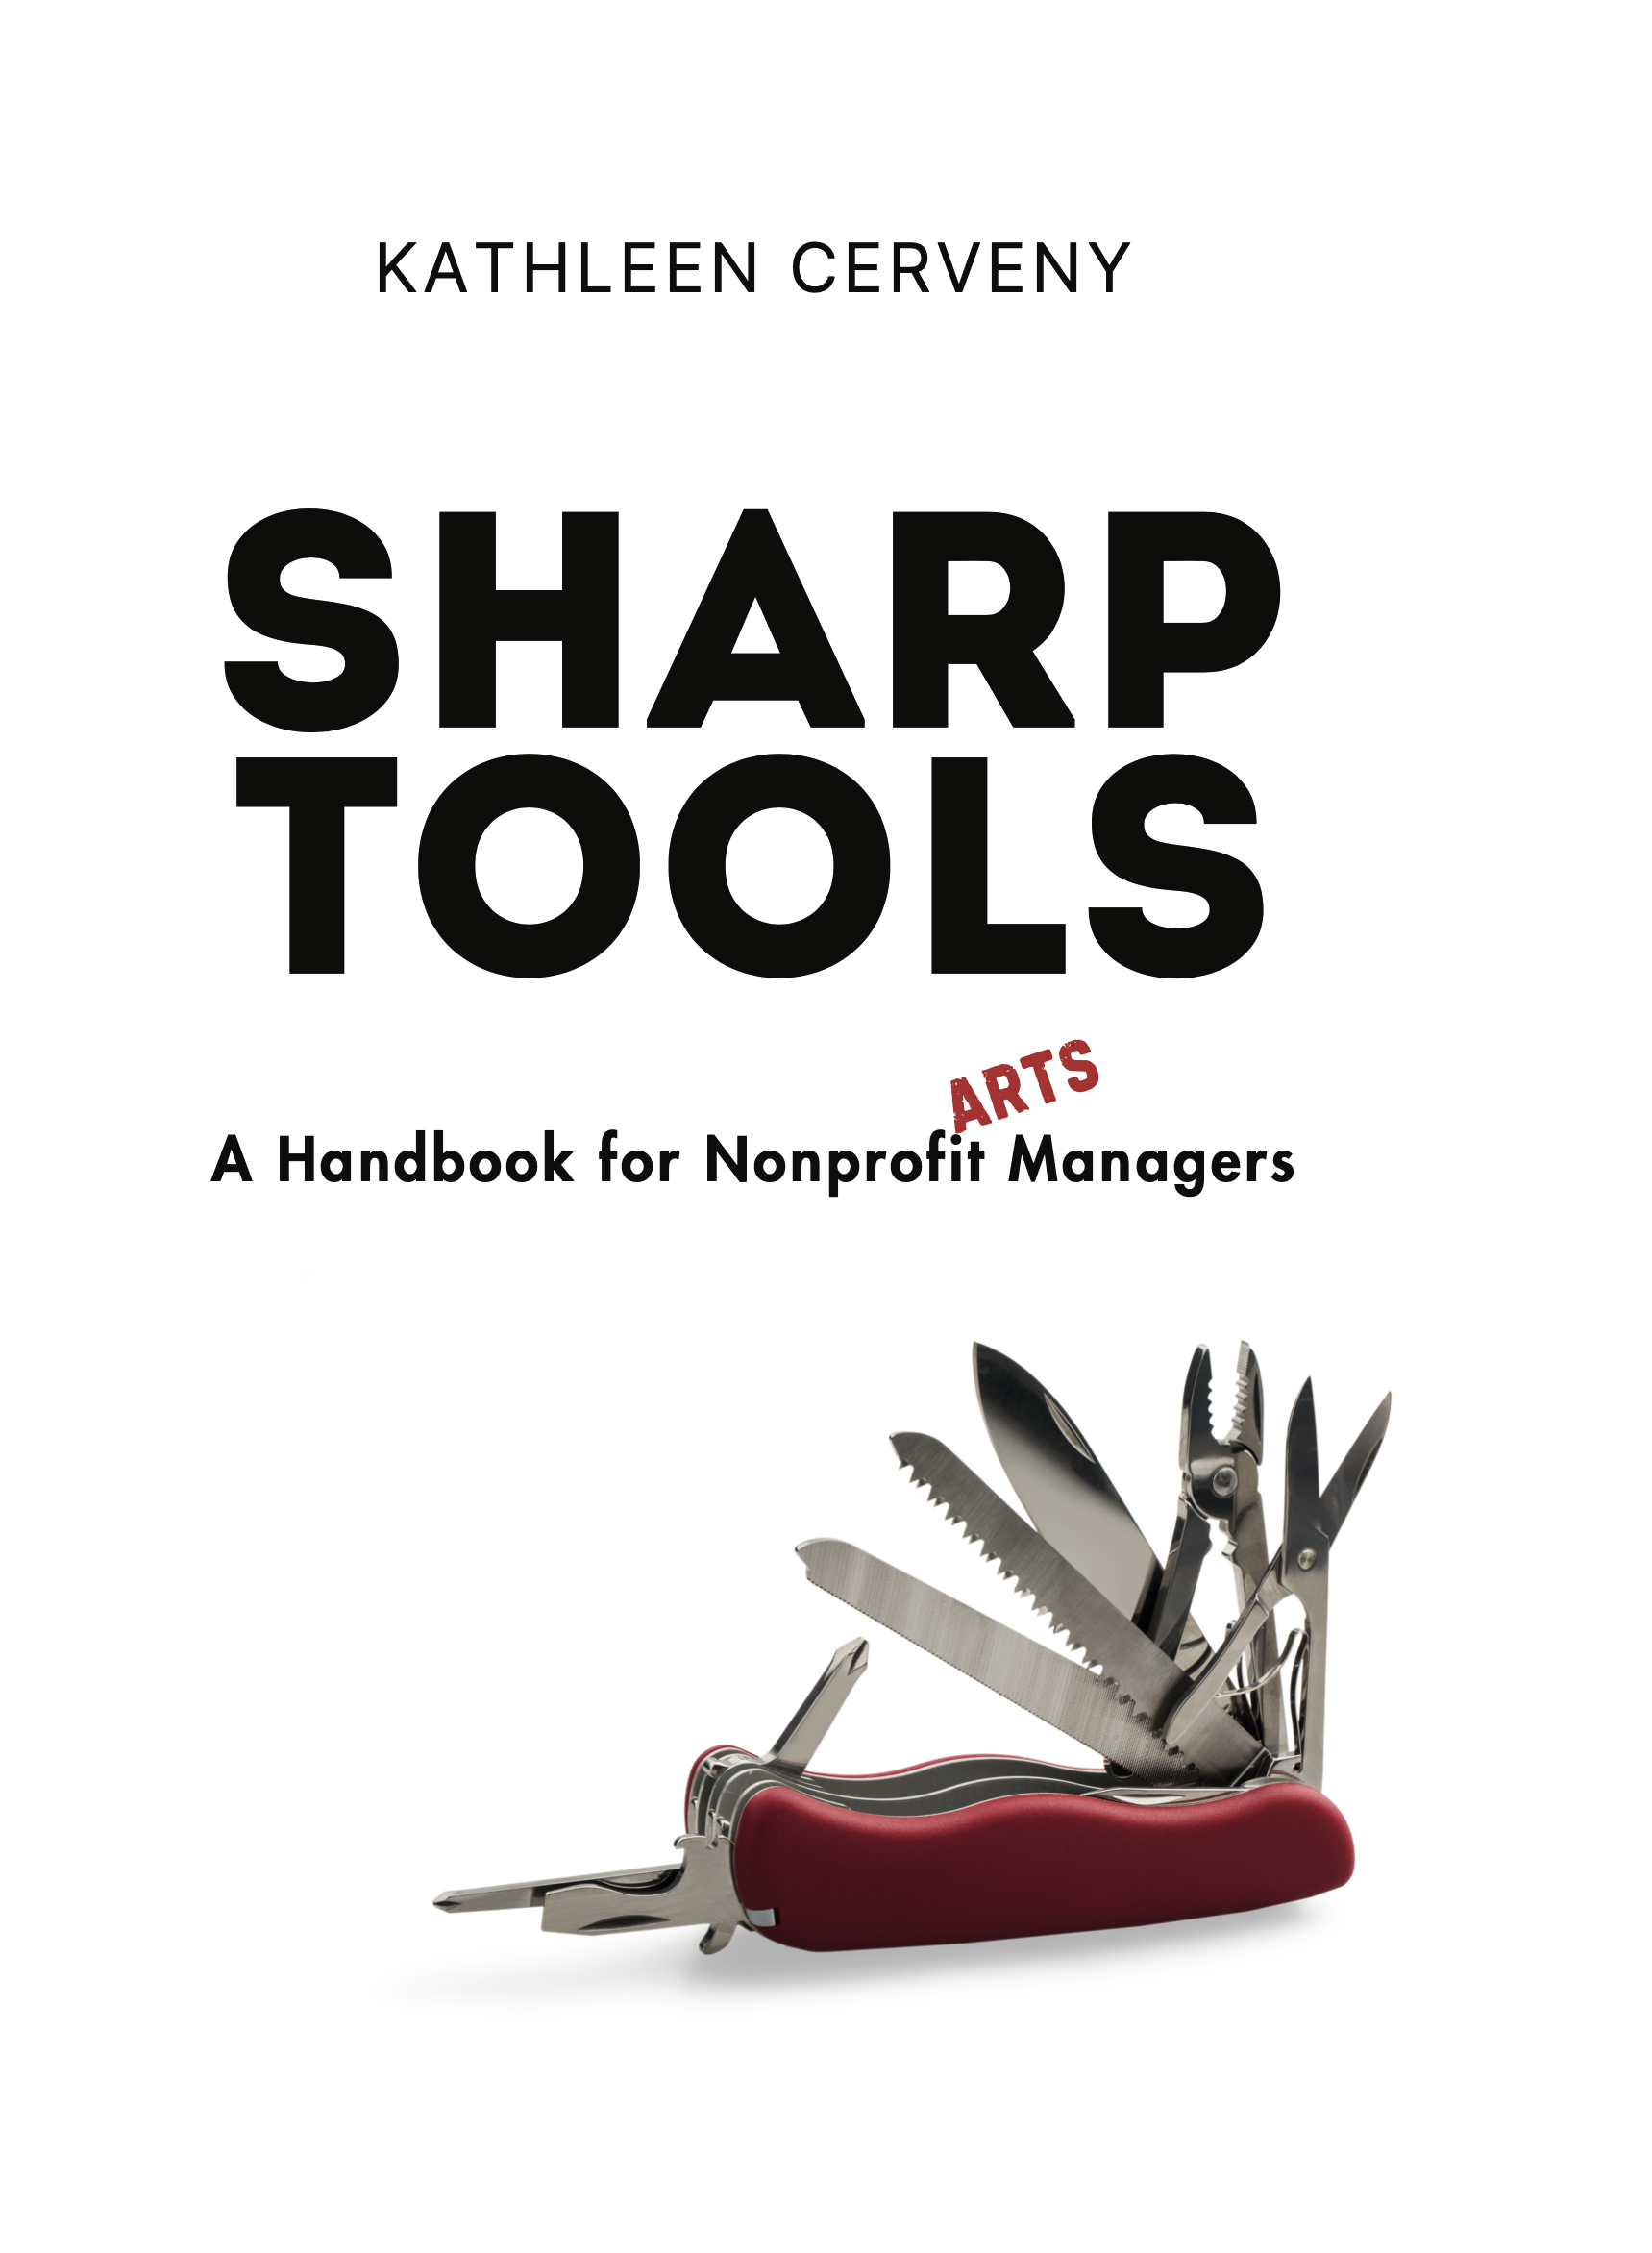 Sharp Tools: A Handbook For Nonprofit Arts Managers by Kathleen Cerveny